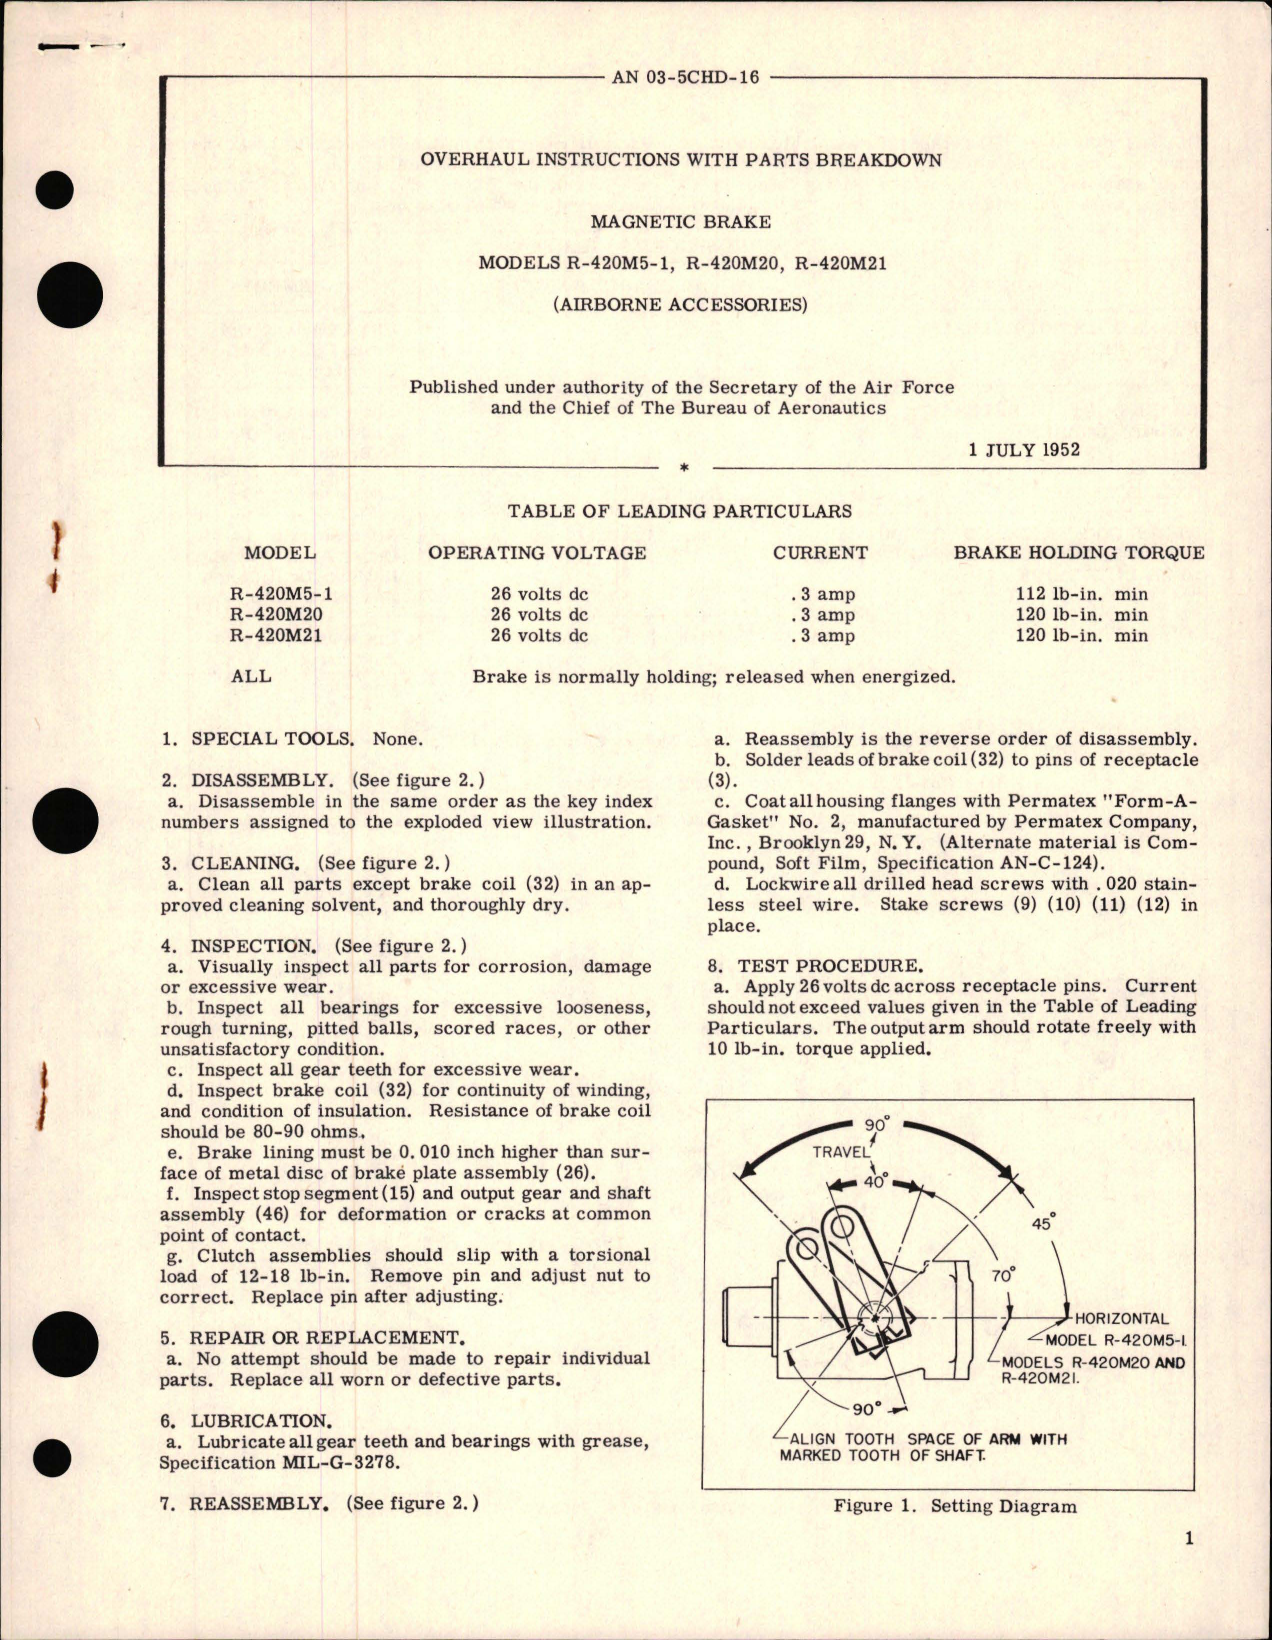 Sample page 1 from AirCorps Library document: Overhaul Instructions with Parts Breakdown for Magnetic Brake Models R-420M5-1, R-420M20 and R-420M21